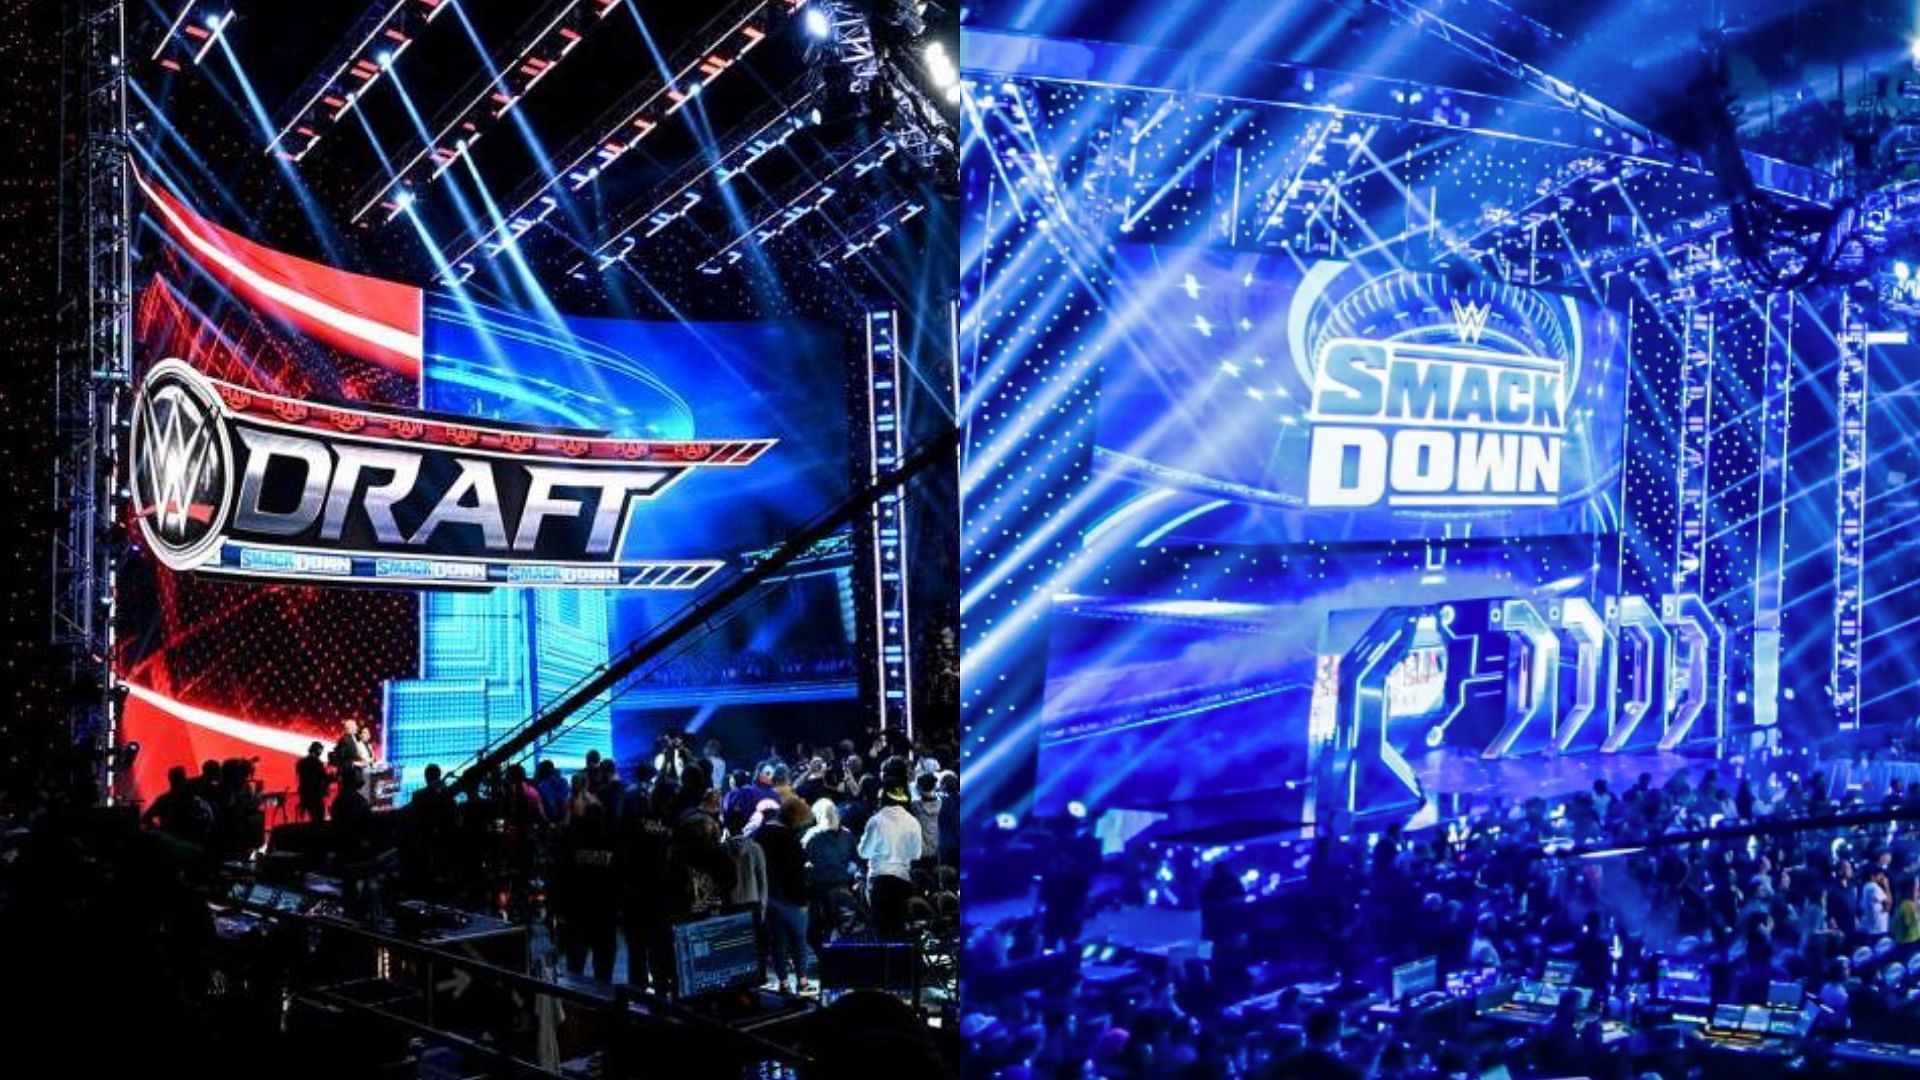 The WWE Draft begins tonight on SmackDown!